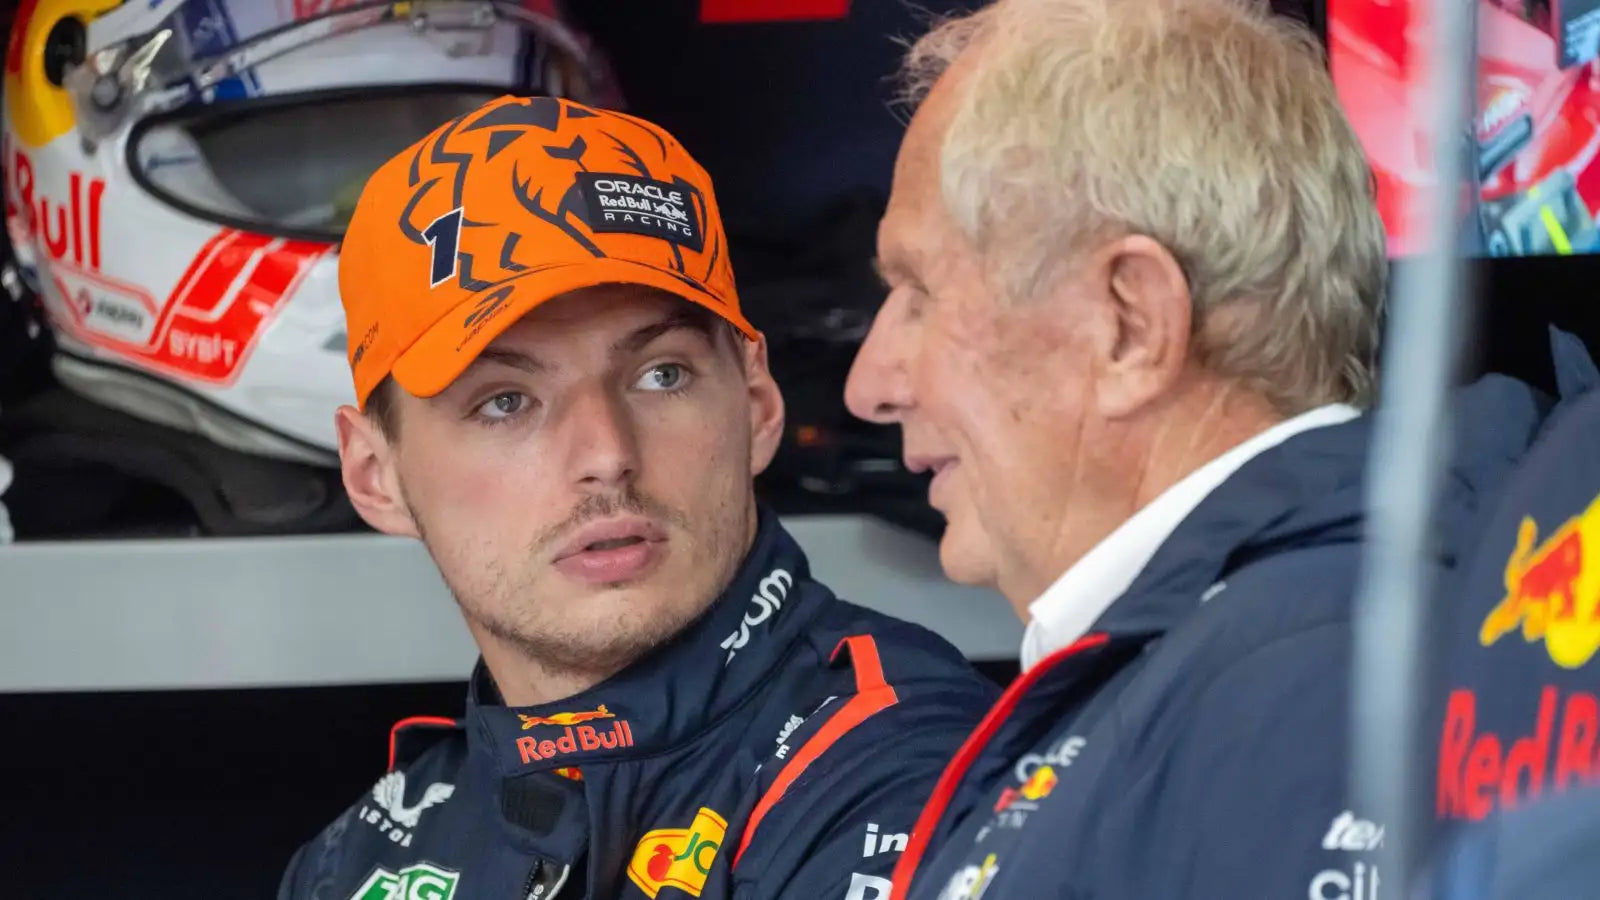 Max Verstappen warns Red Bull as Helmut Marko teases exit – F1 news round-up